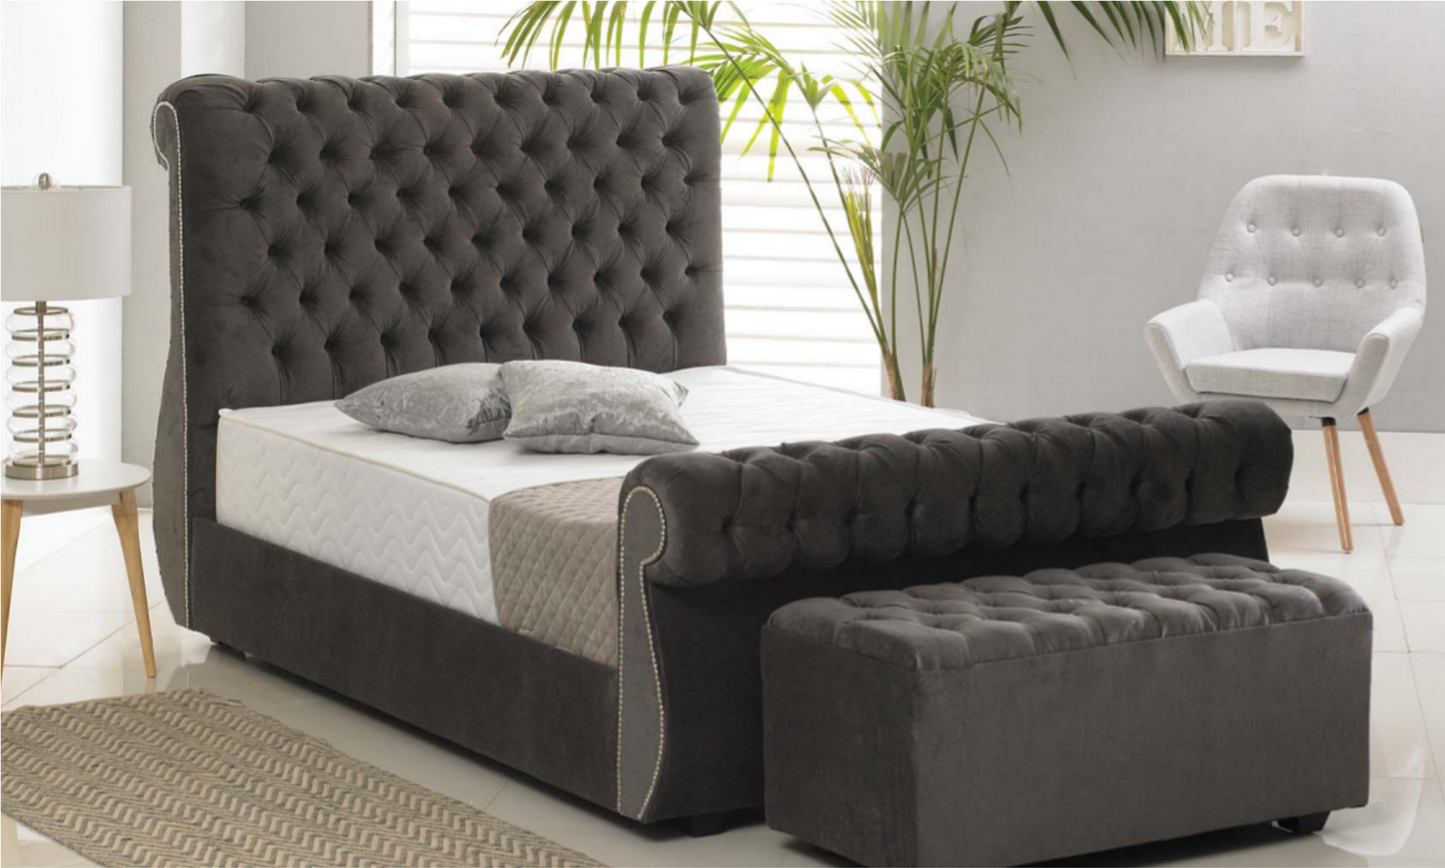 Chiswick Luxury Bed Frame in Malta Graphite